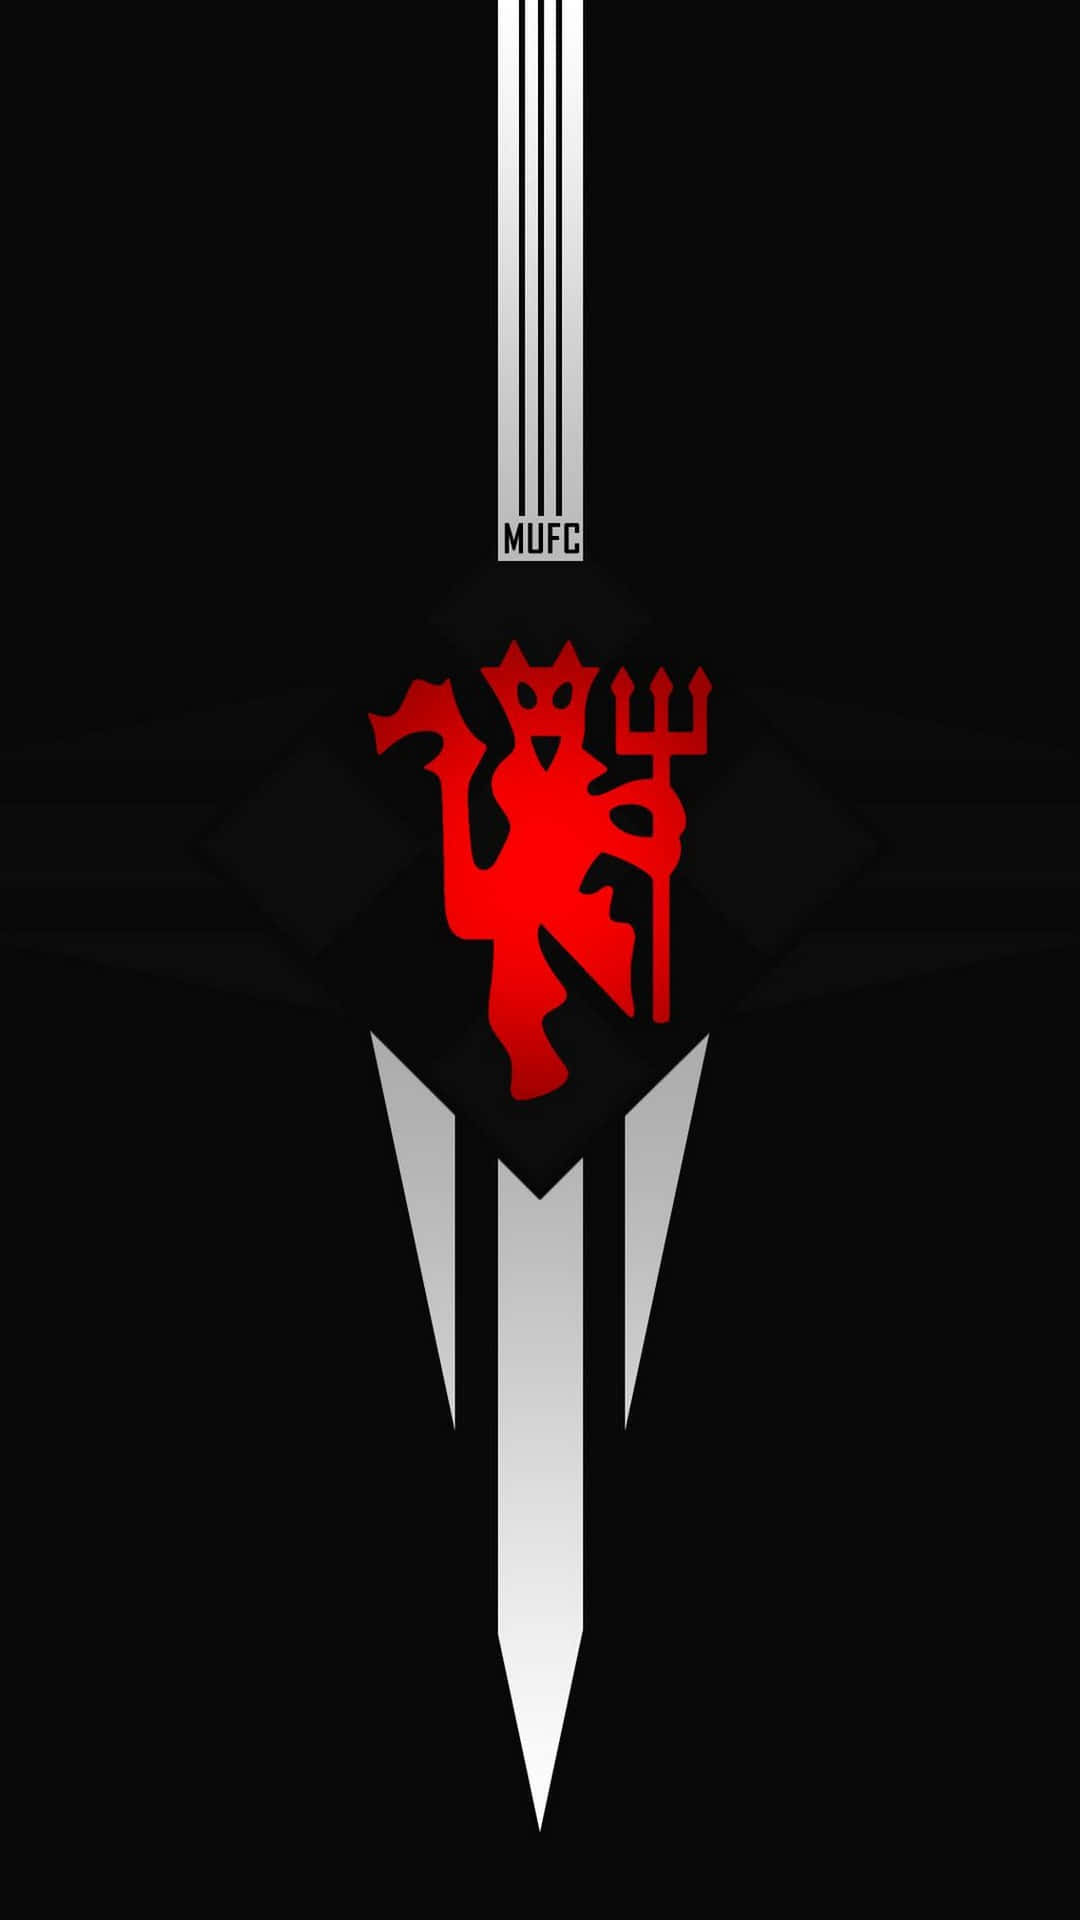 Download Manchester United iPhone Black And Red Wallpaper